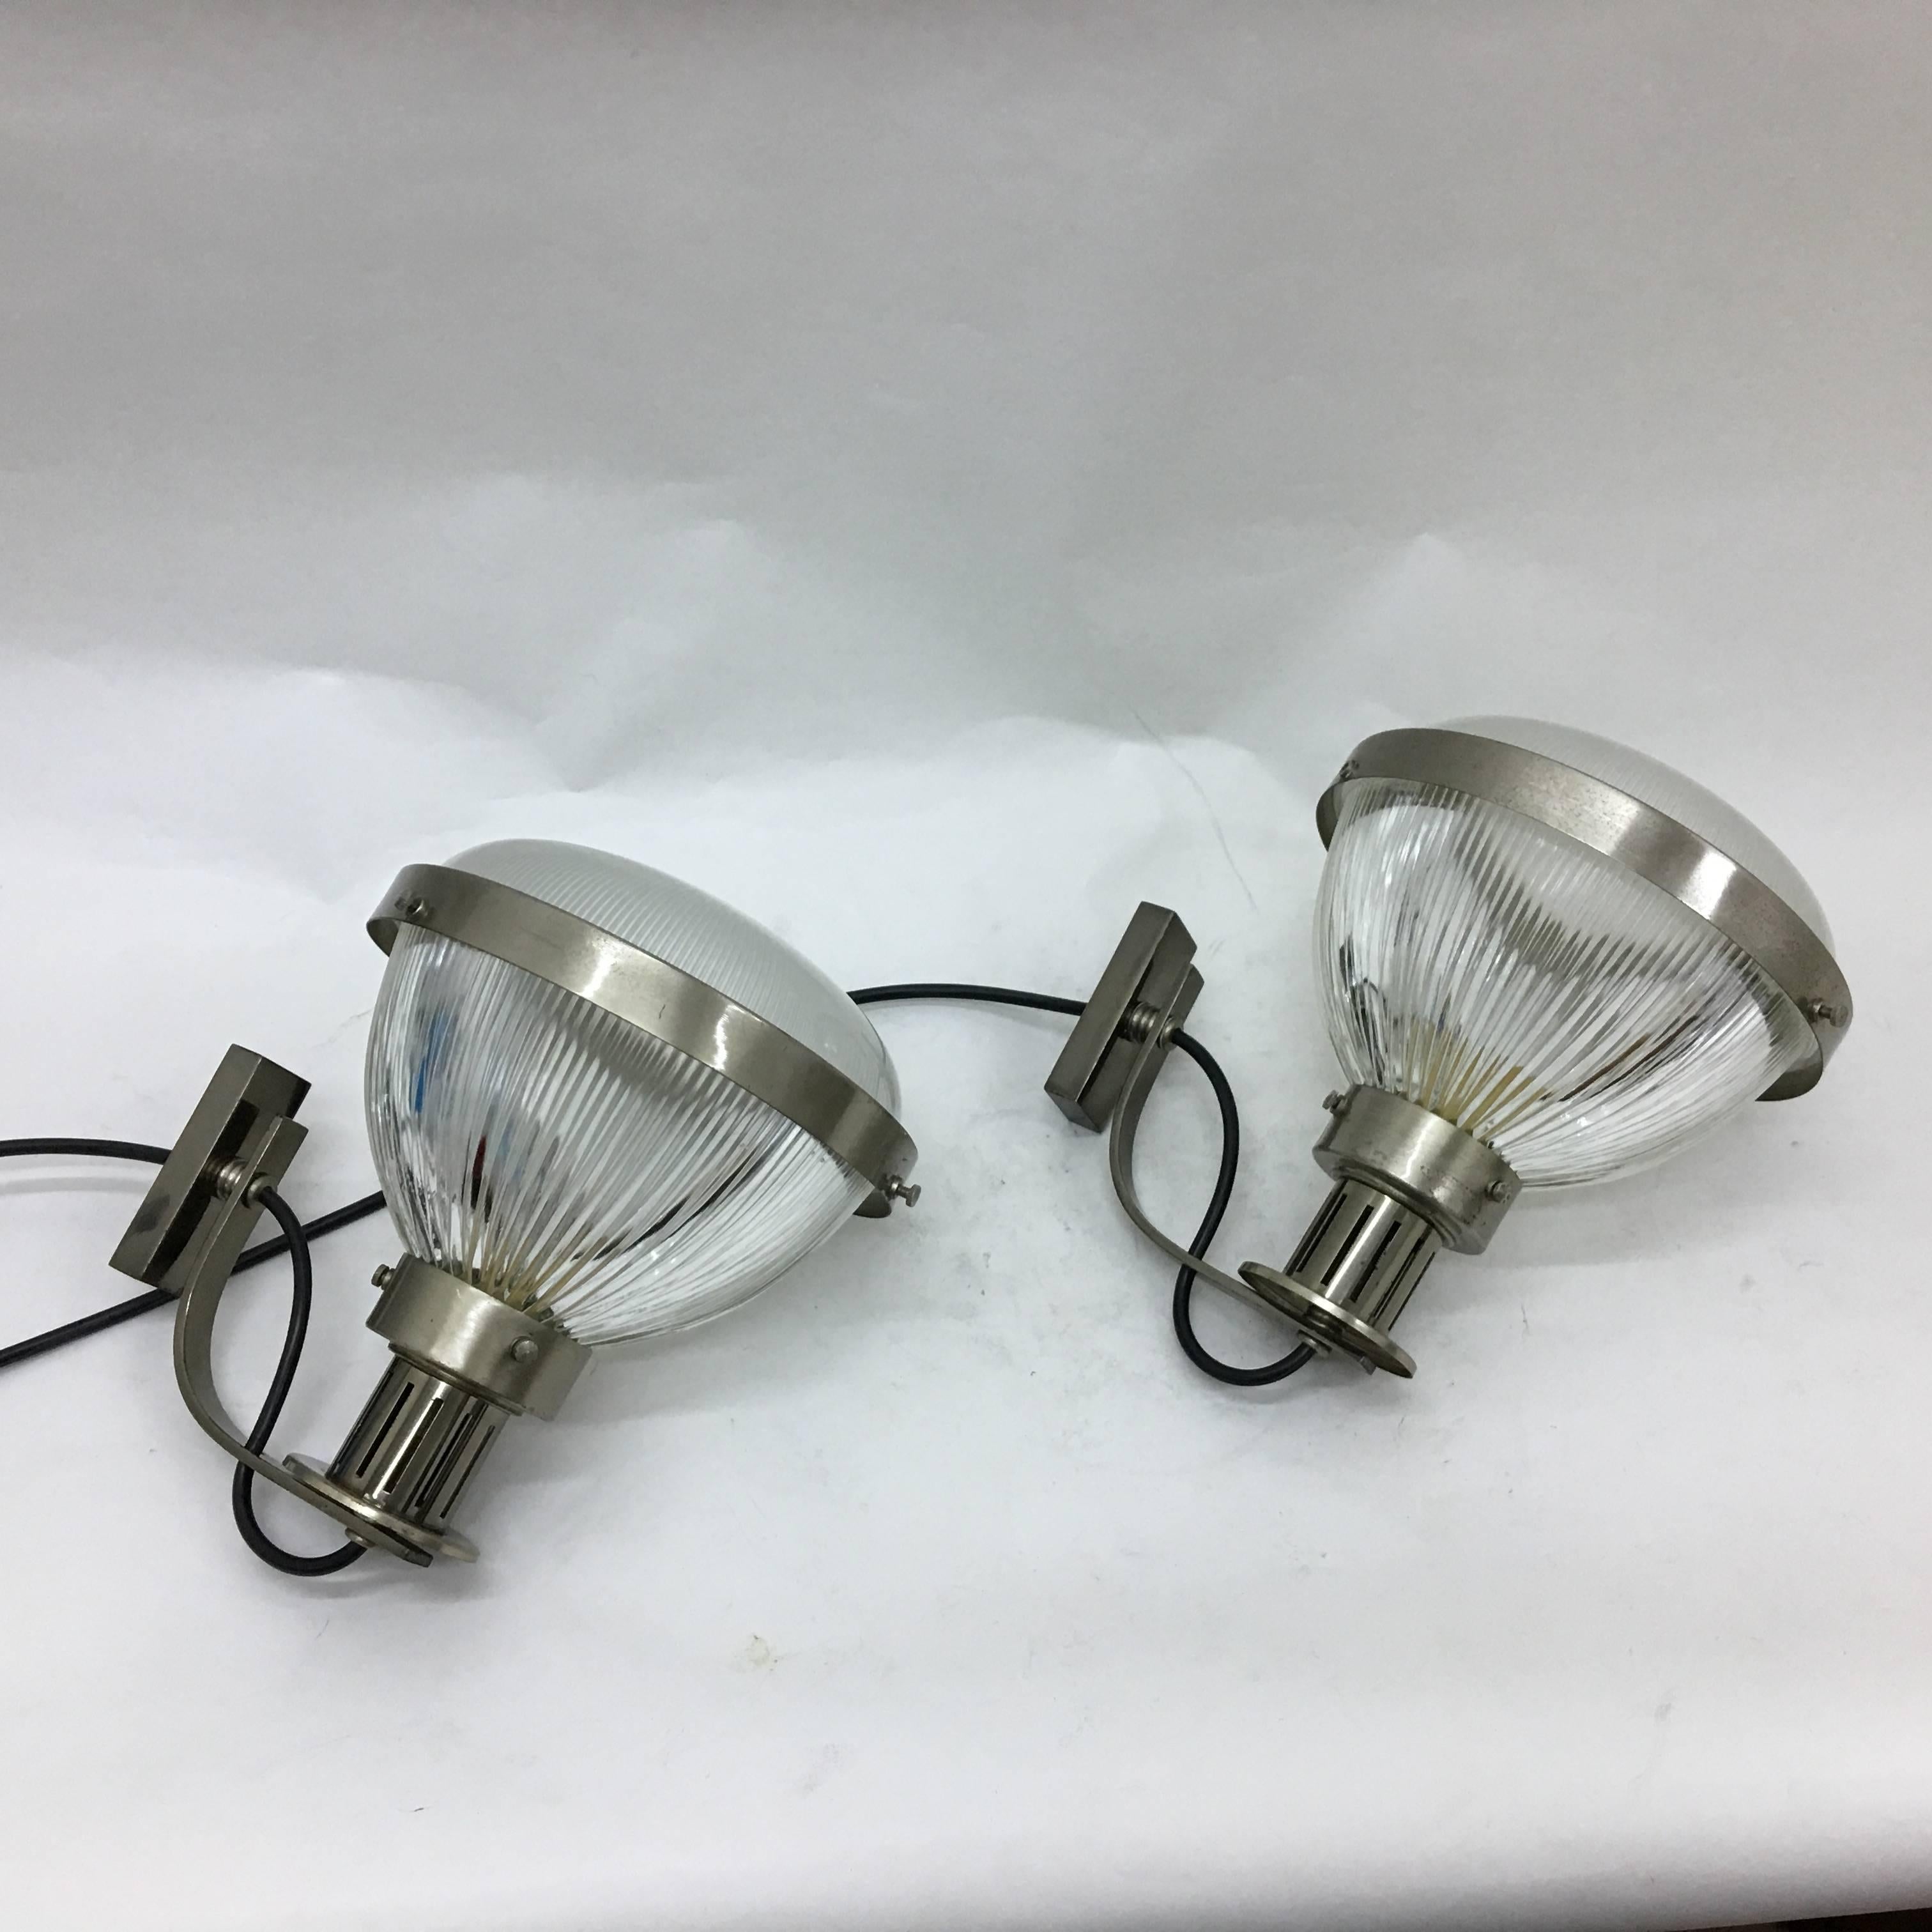 Amazing pair of wall lights attributed to Ignazio Gardella, good conditions overall, rewired, they works with 110-240 volts and need regular e27 bulbs.